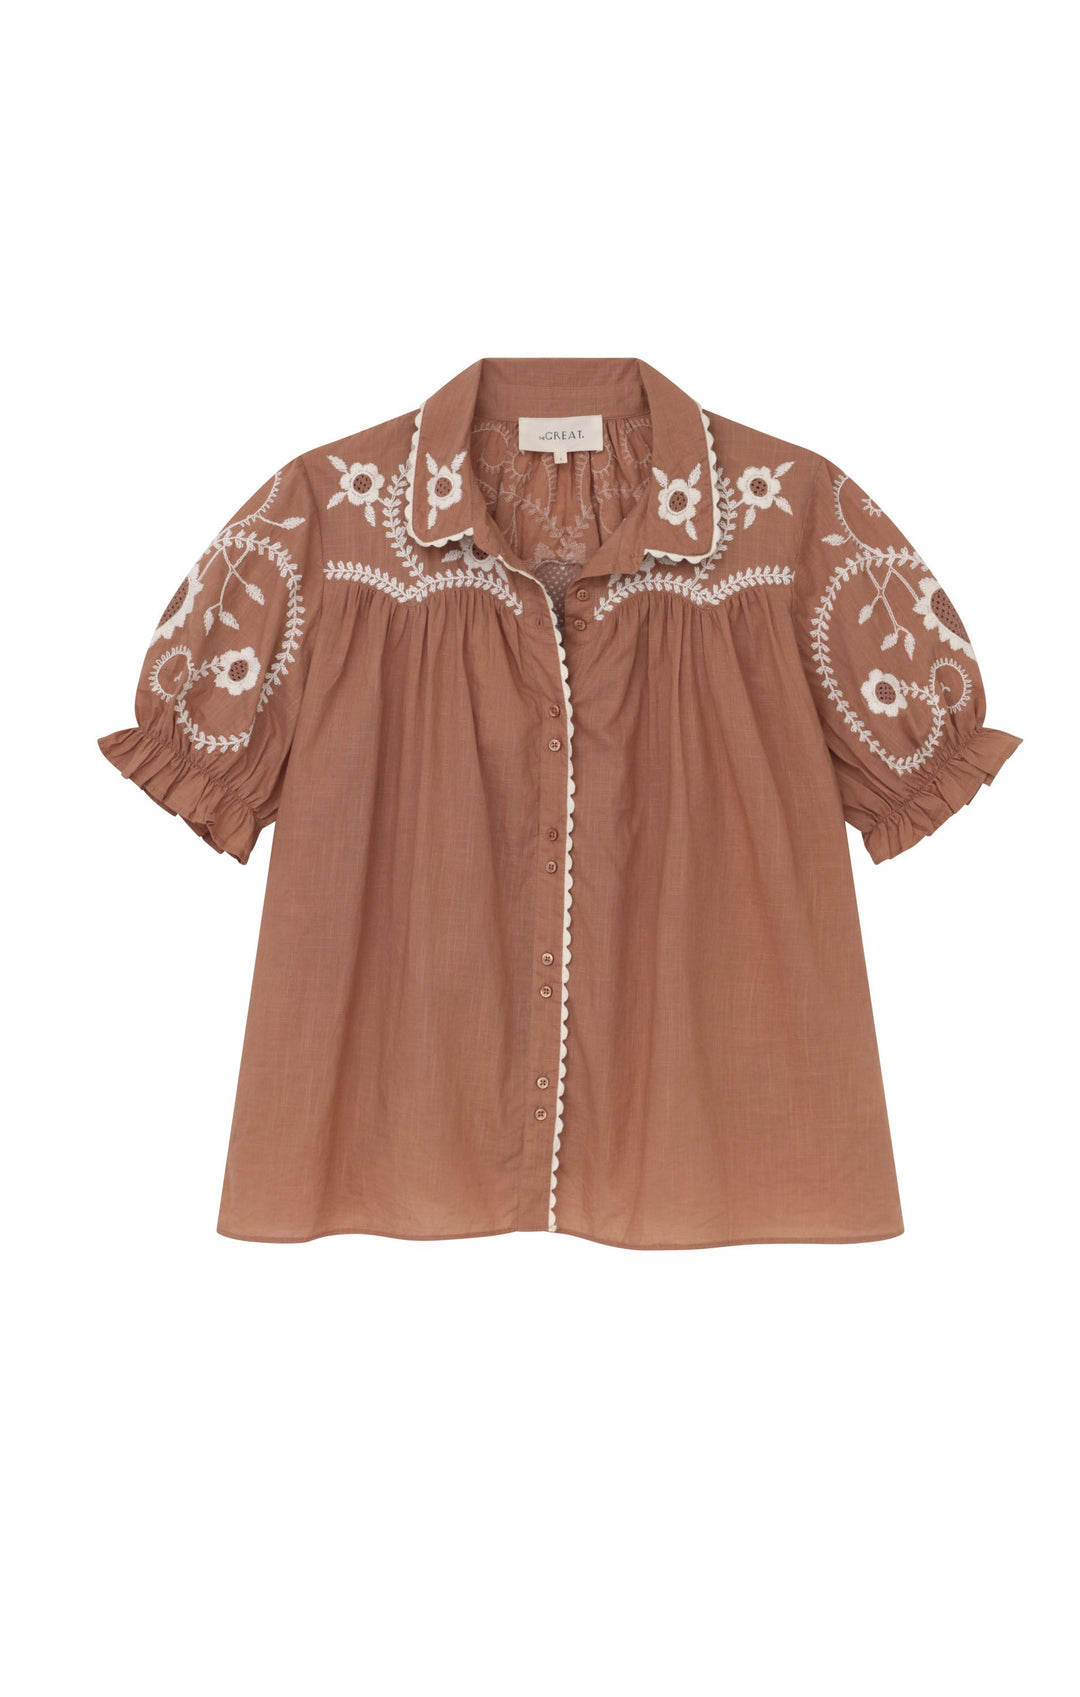 The Great - The Kerchief Top in Sandy Peach Western Embroidery